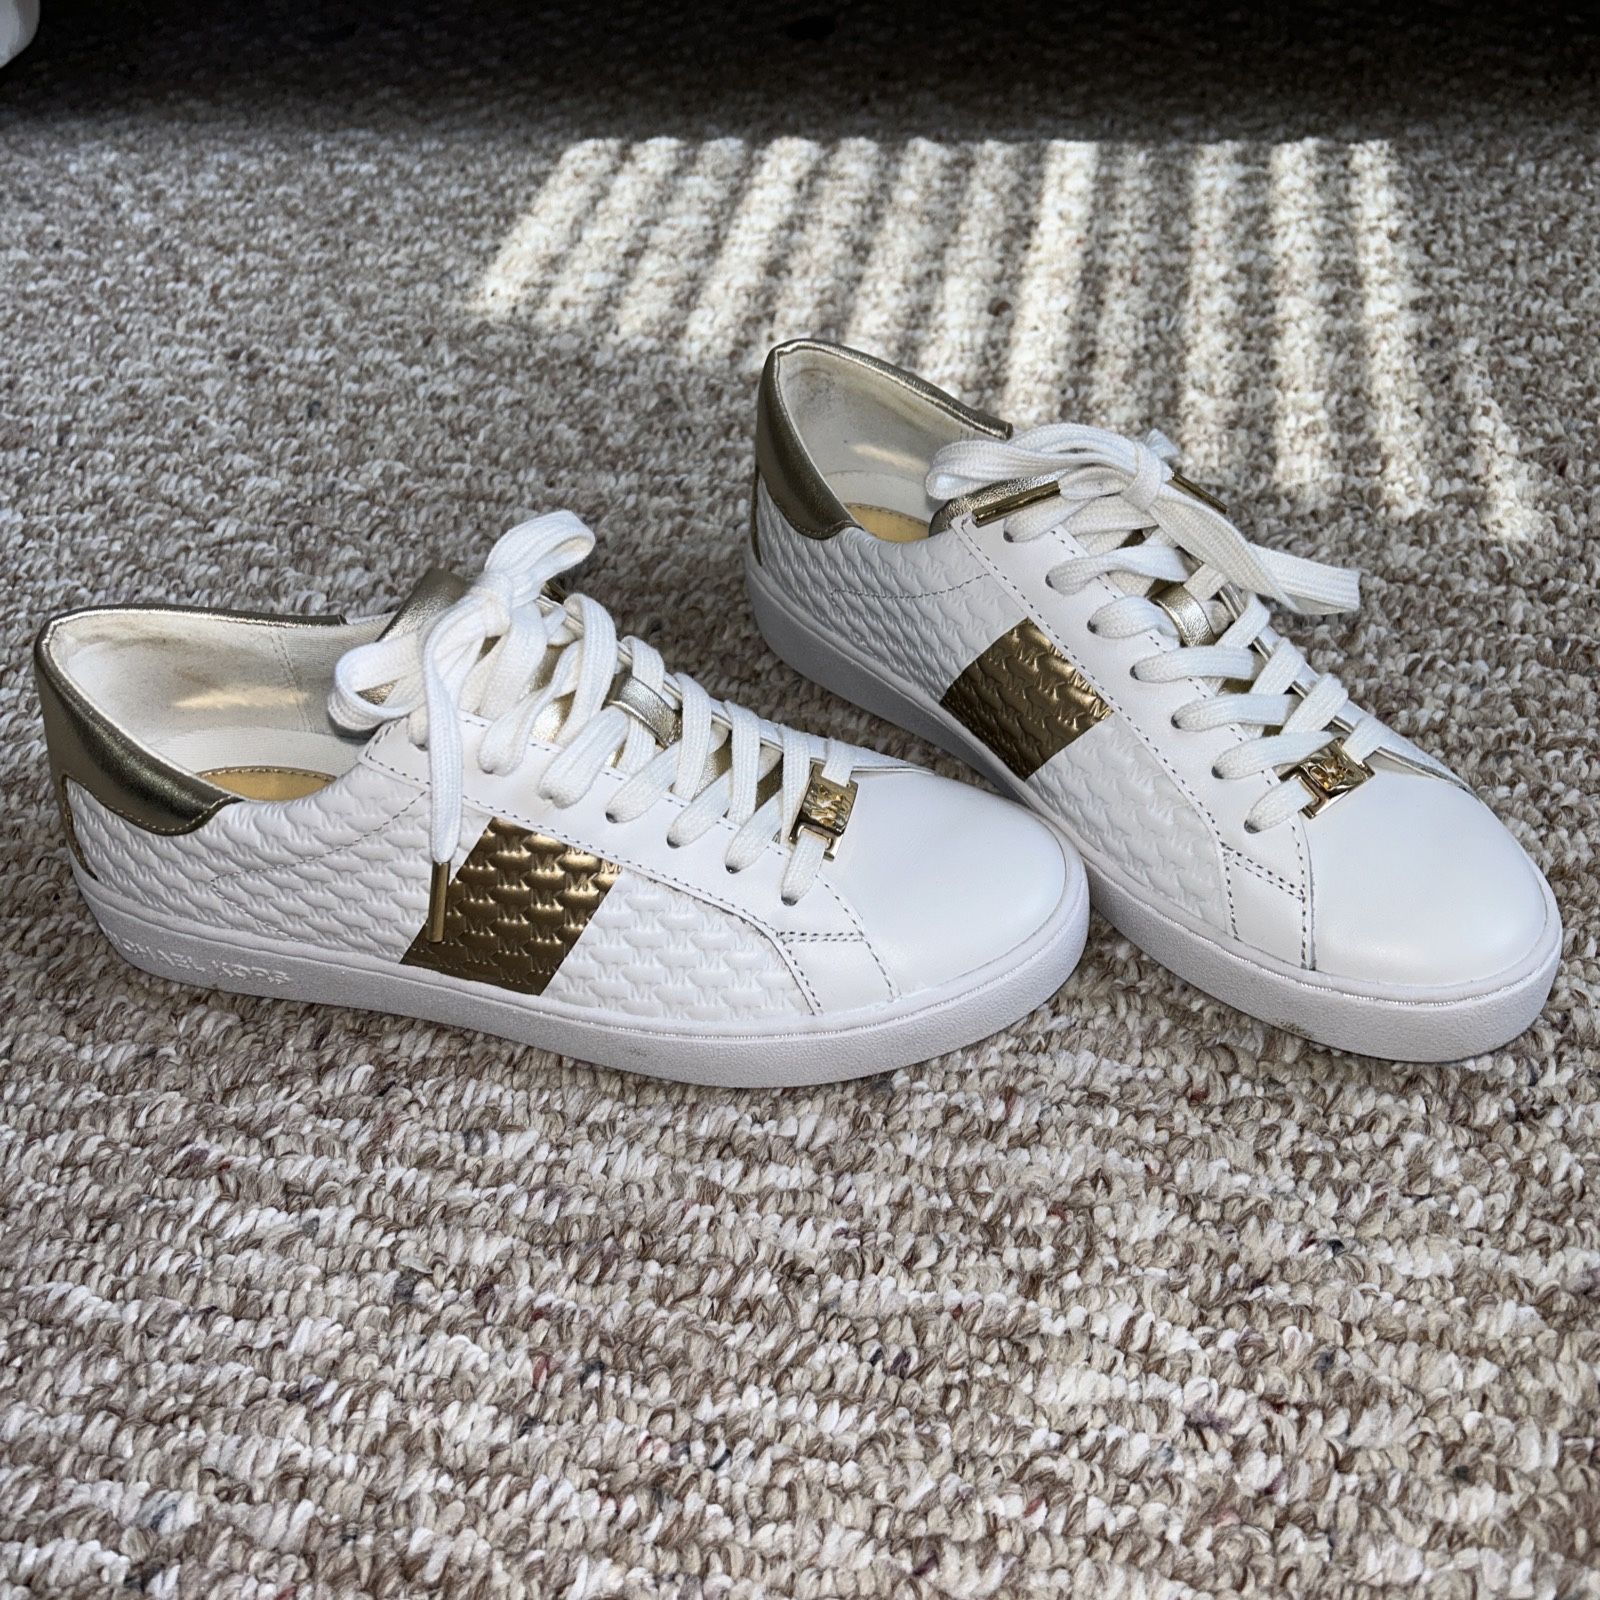 Authentic Michael Kors Sneakers, Size 7